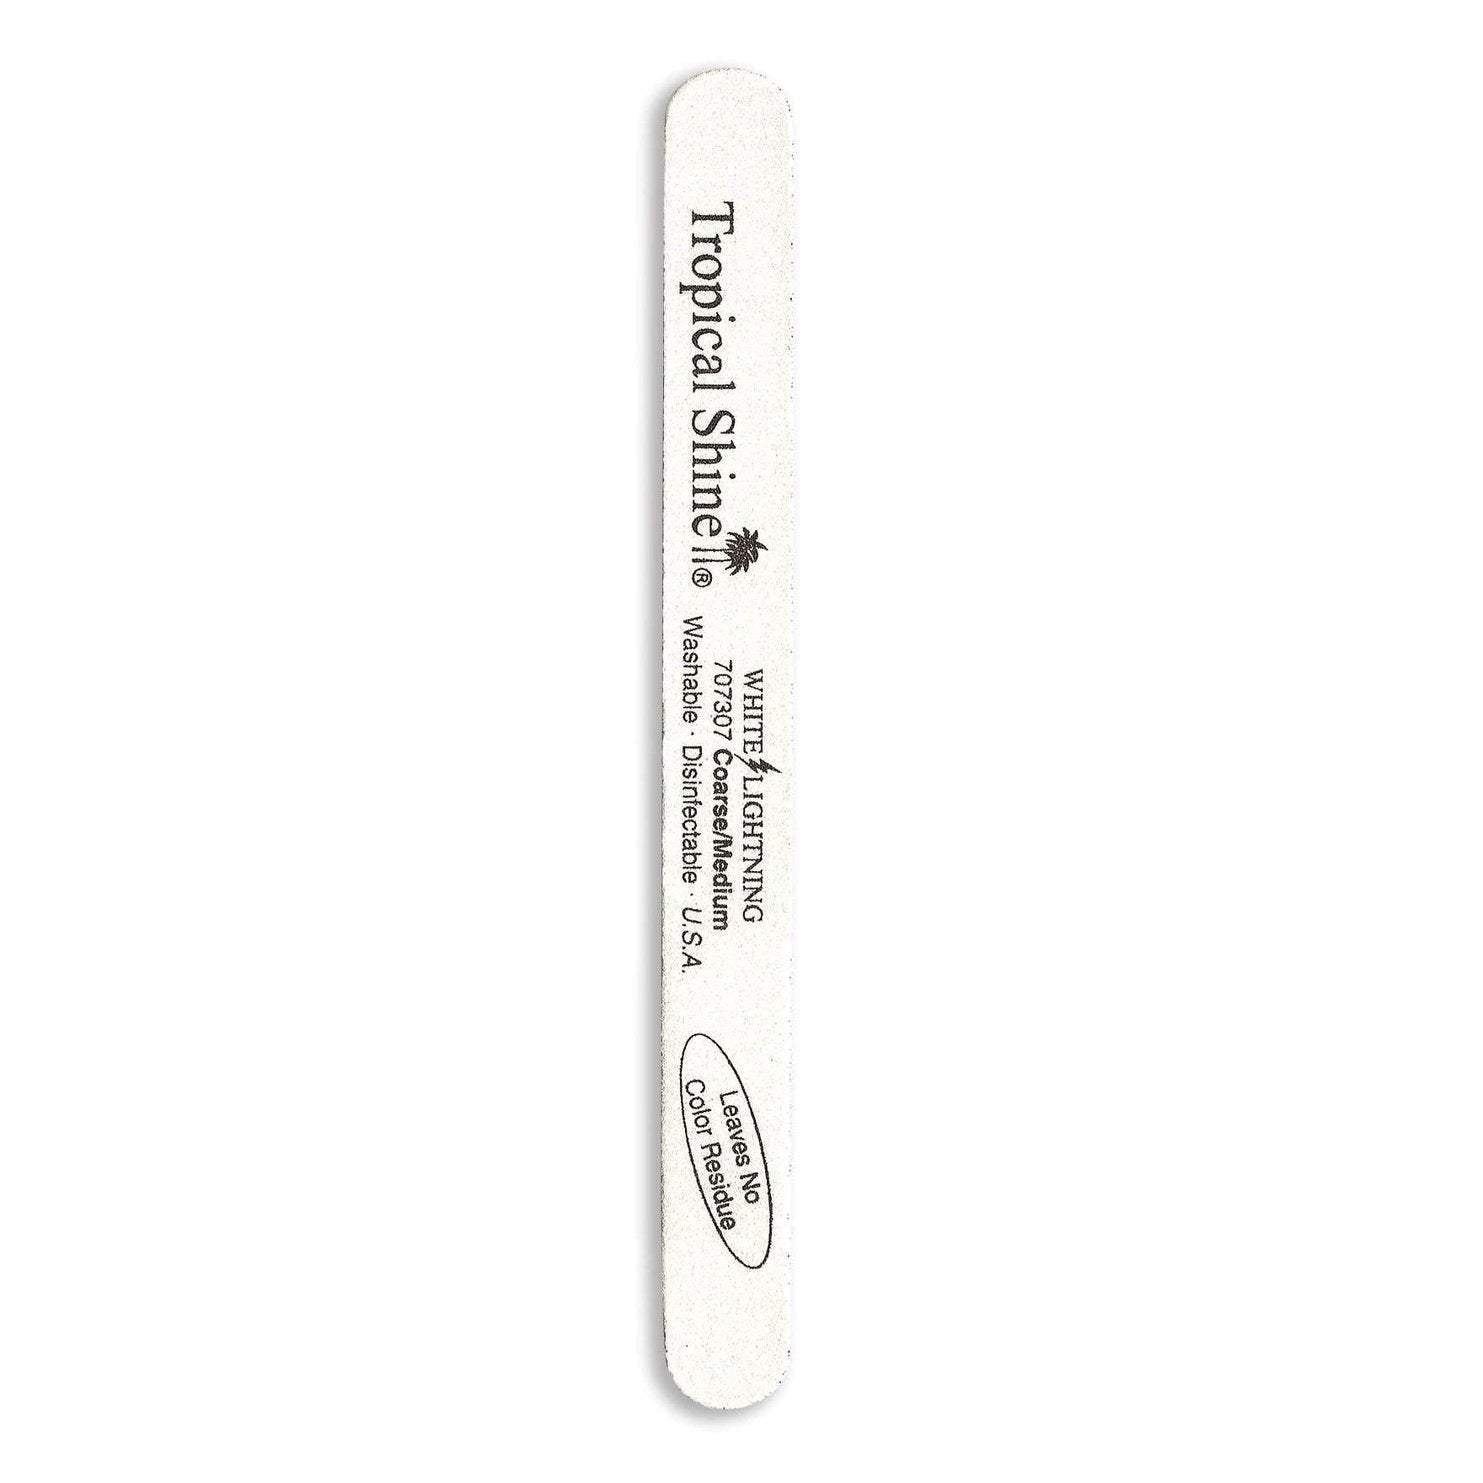 Tropical Shine Nail File White Lightning File 100/ 180 (Coarse/ Medium) 7 1/2 in x 3/4 in Large Size (707307)-Tropical Shine-Brand_Tropical Shine,Collection_Nails,Nail_Tools,Tool_Nails